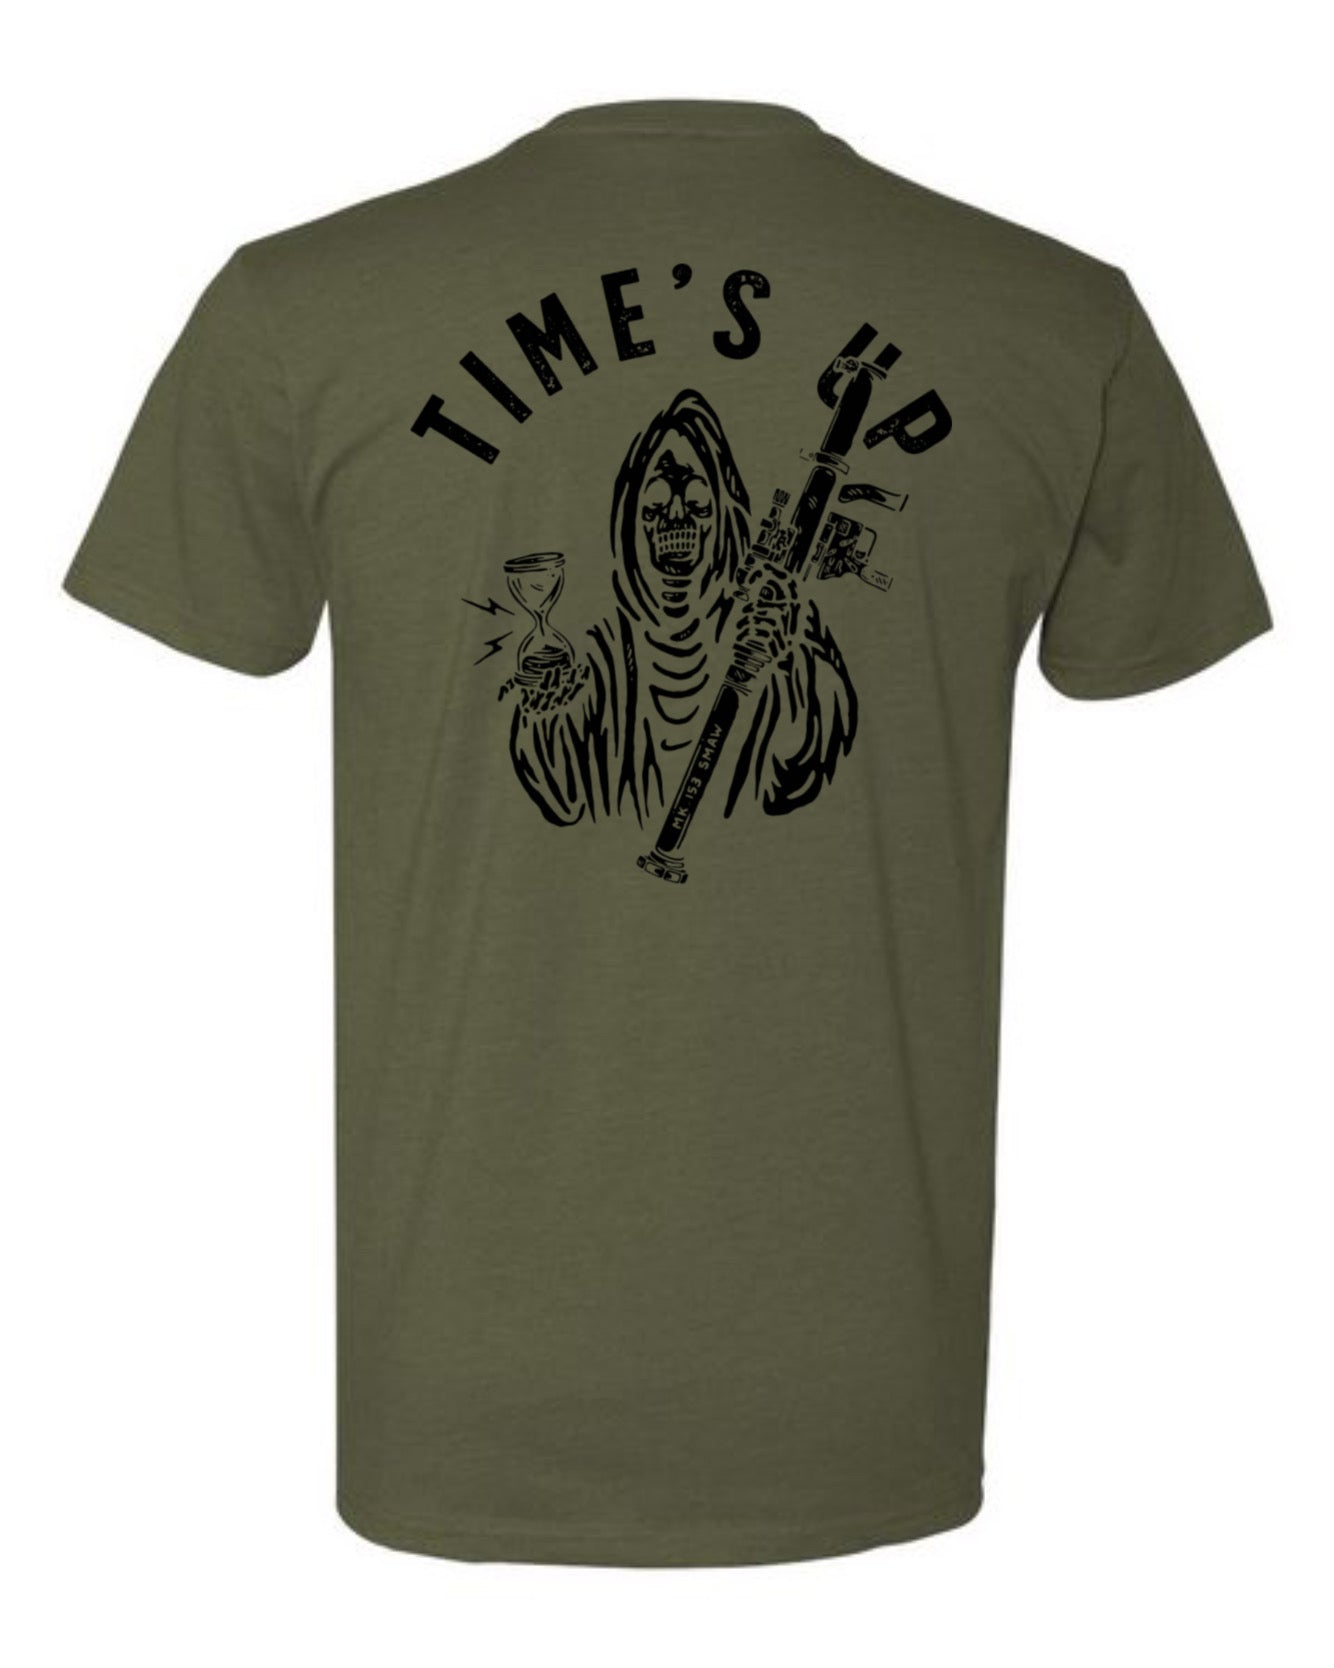 Time's Up Tee